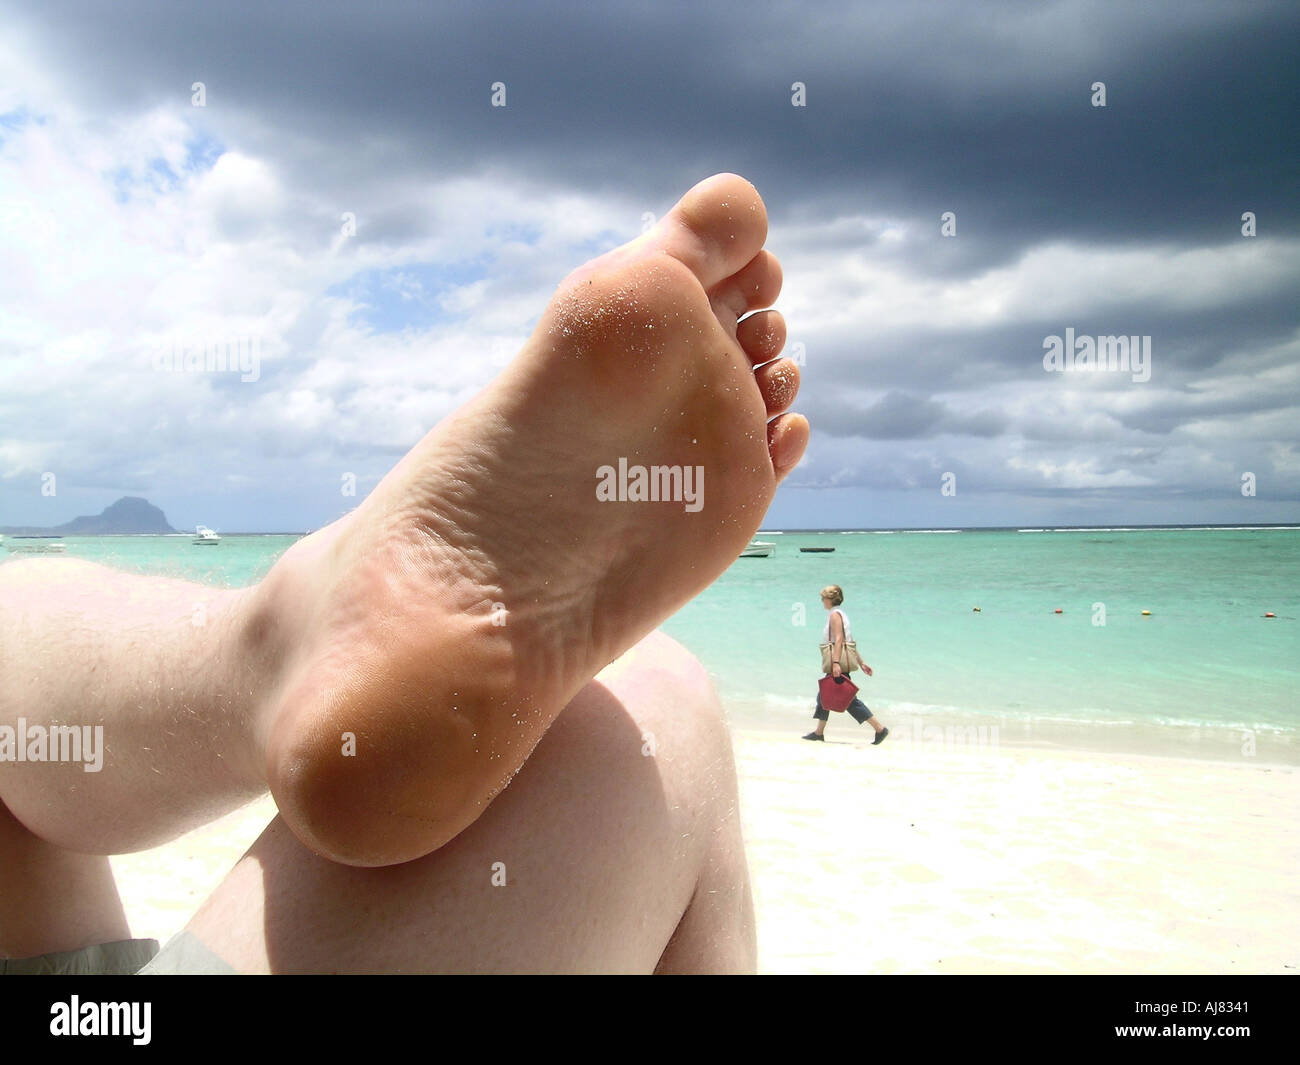 Sole of man's foot at beach Stock Photo